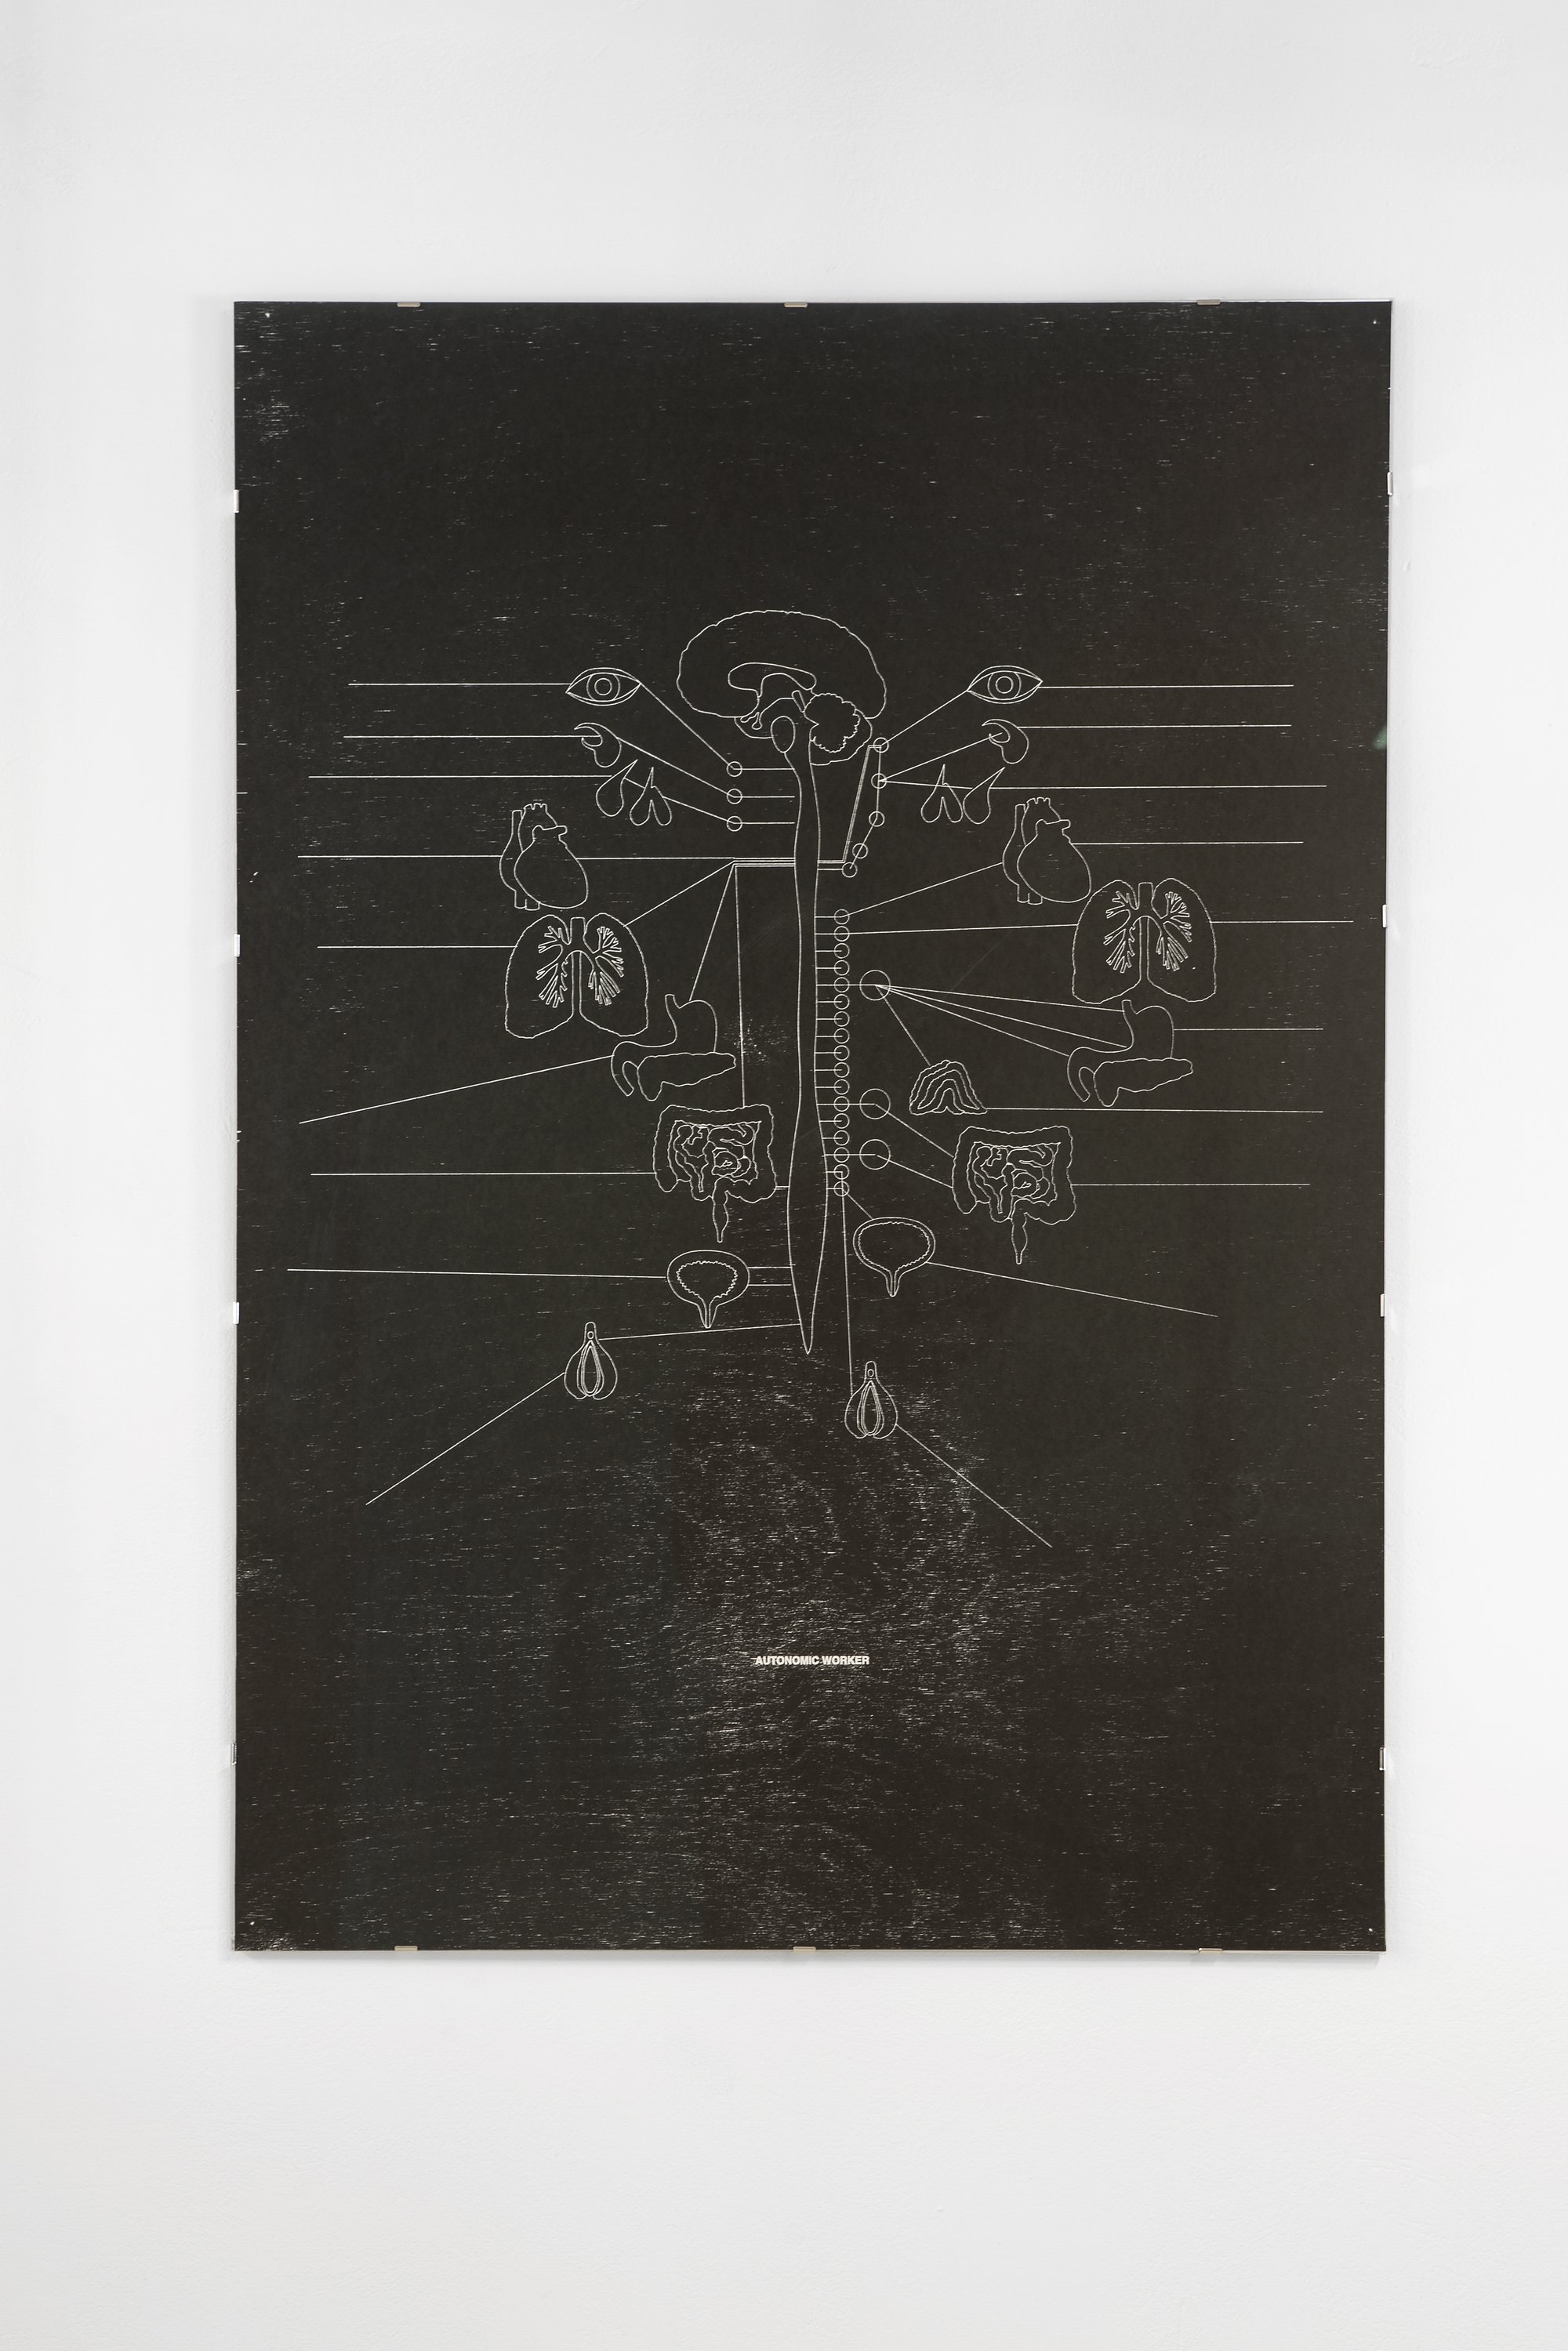 Sidsel Meineche Hansen, Automatic Worker, Laser woodcut on paper, mounted on aluminium under museum glass 101.3 × 70.7 cm, 2013/2016. Installation view, Portals, NEON, Former Tobacco Factory, 2021